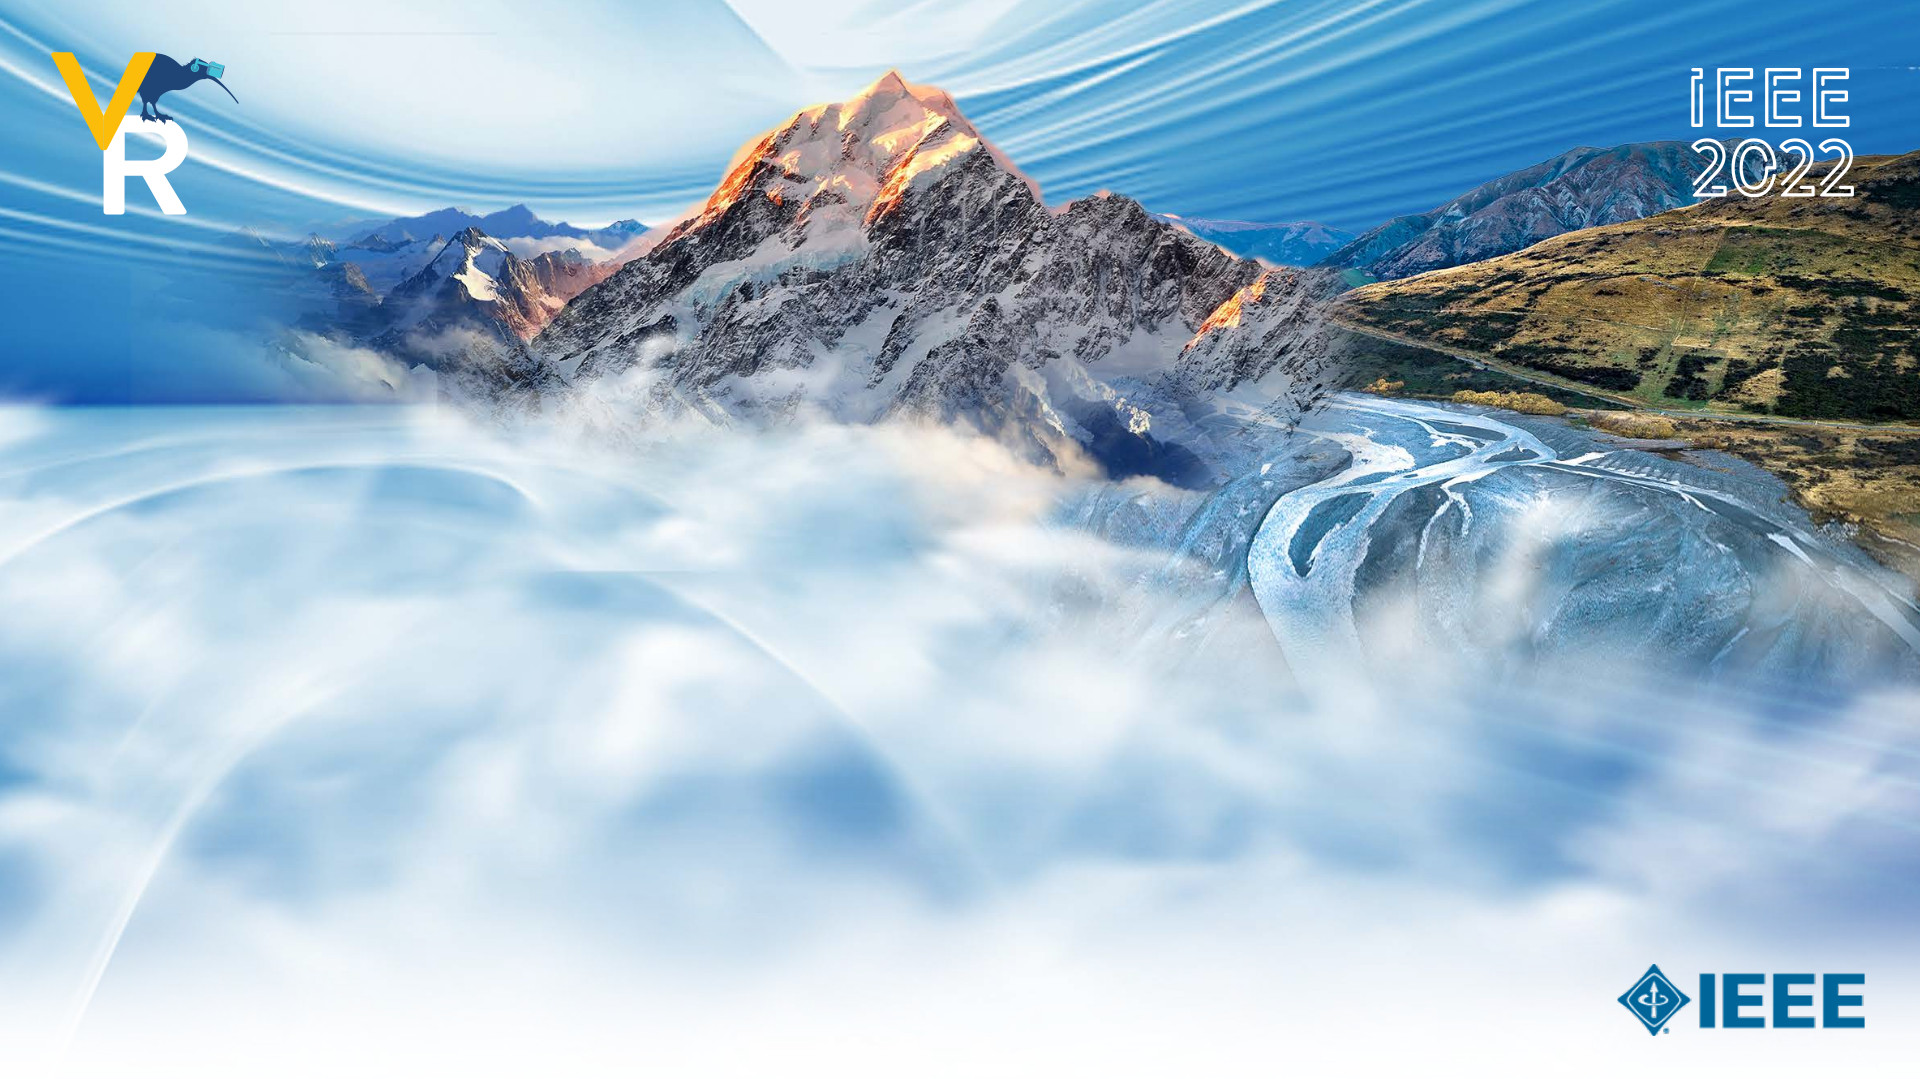 An abstract image of a mountain with the IEEE VR logo overlaid. To be used as a Zoom background.